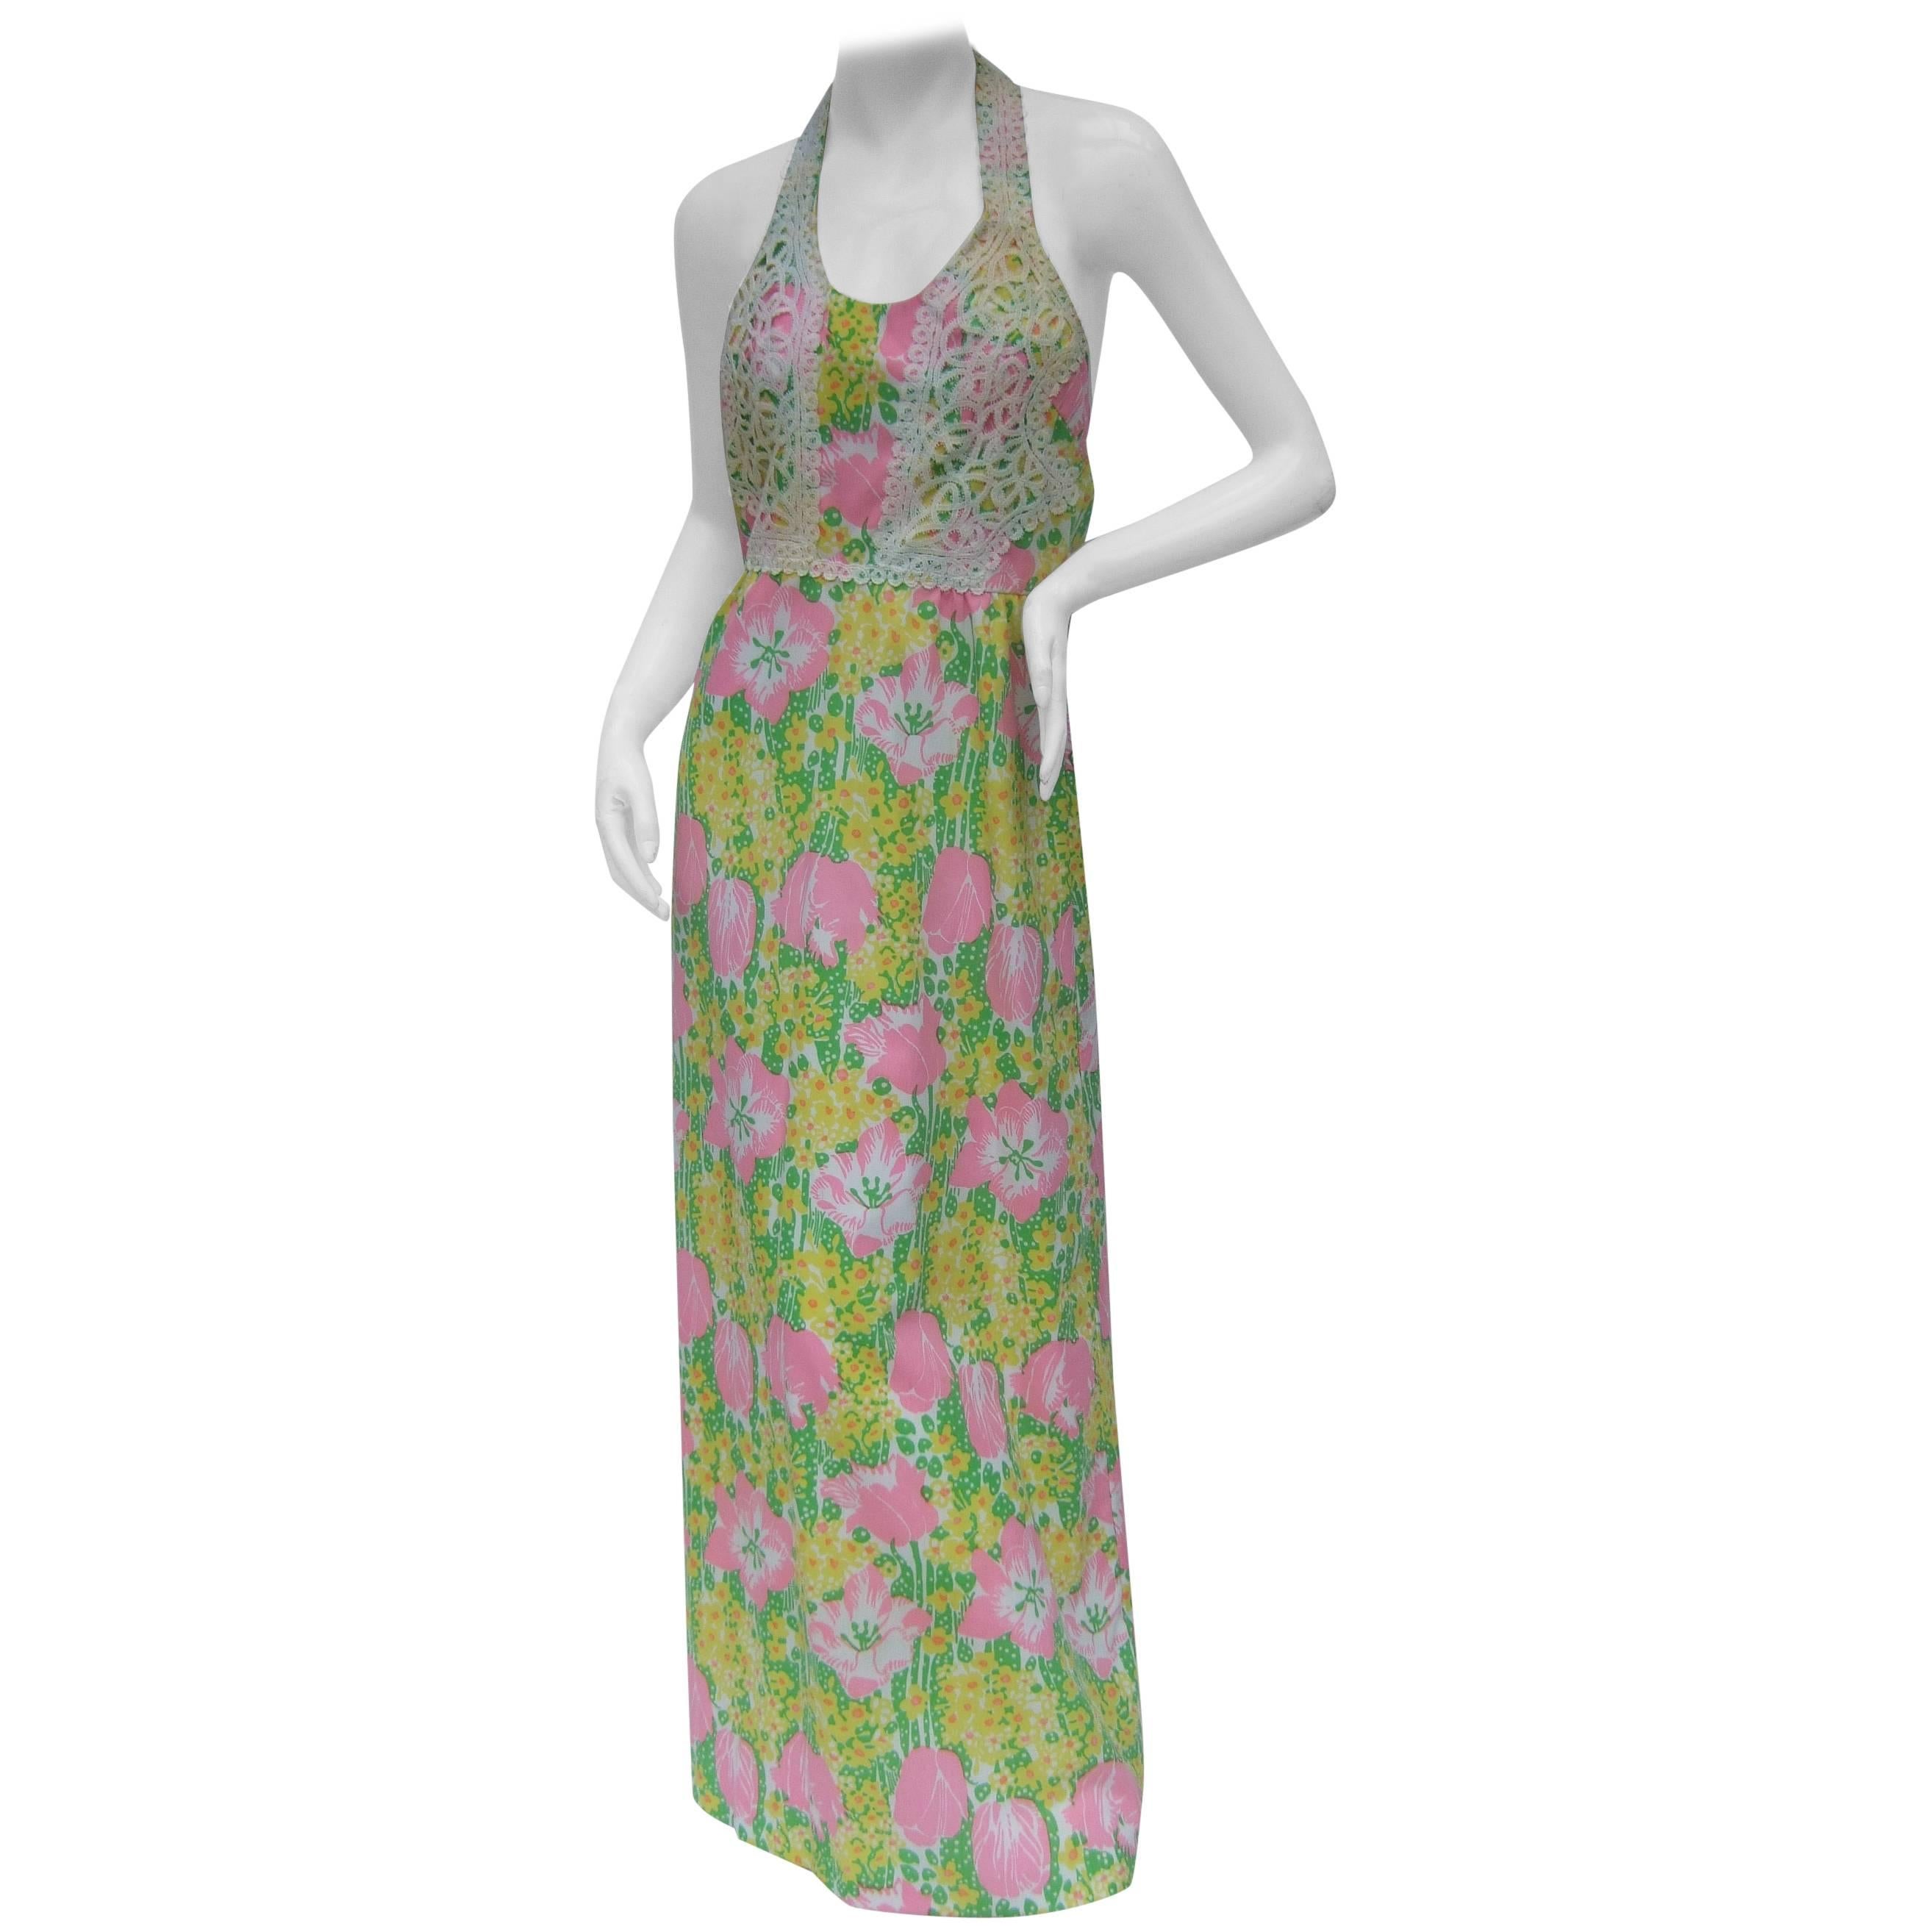 Lilly Pulitzer Vibrant Floral Print Halter Gown c 1970s